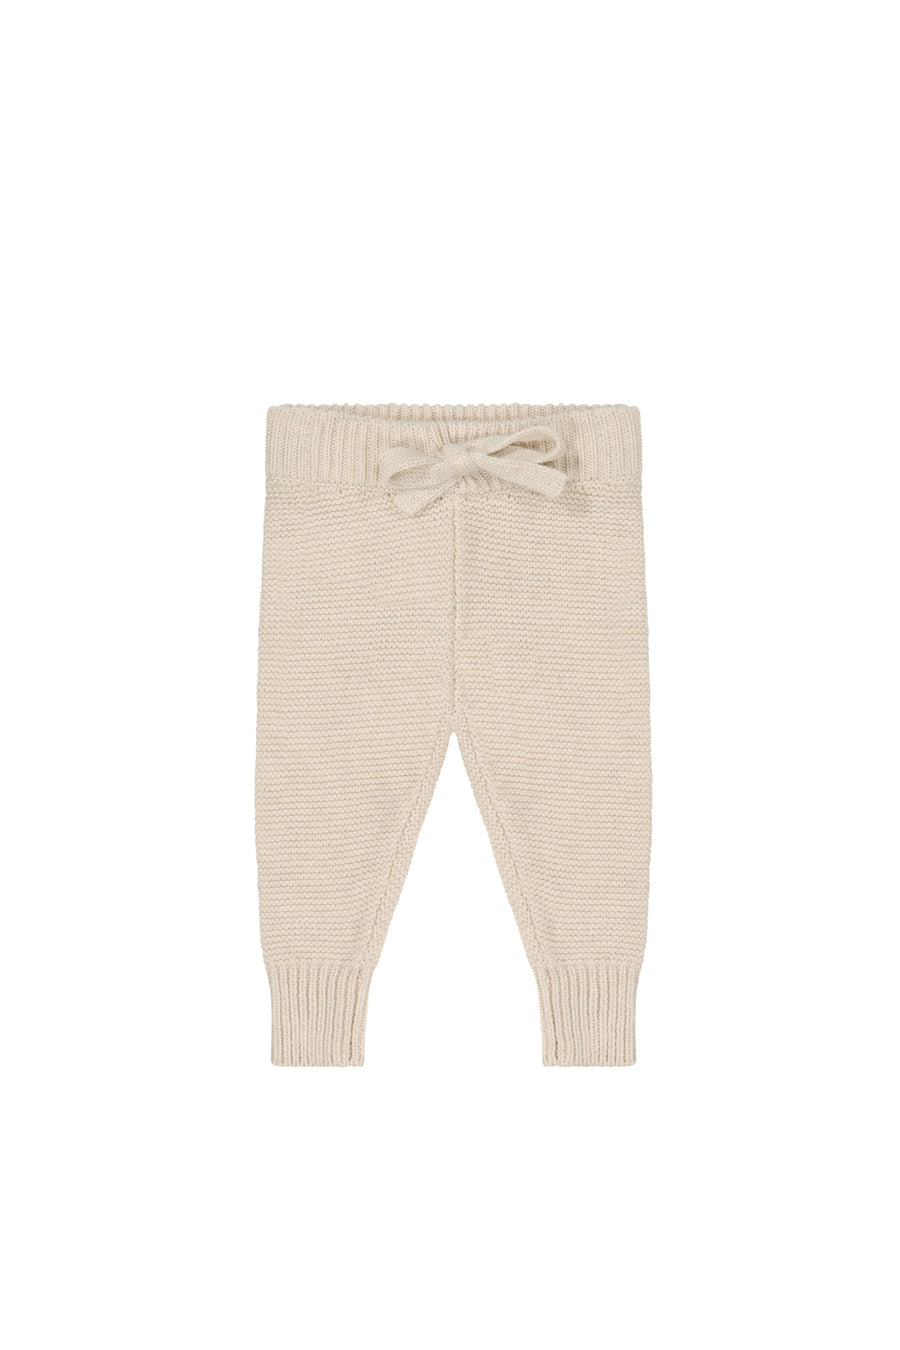 Ethan Pant - Oatmeal Marle Childrens Pant from Jamie Kay NZ